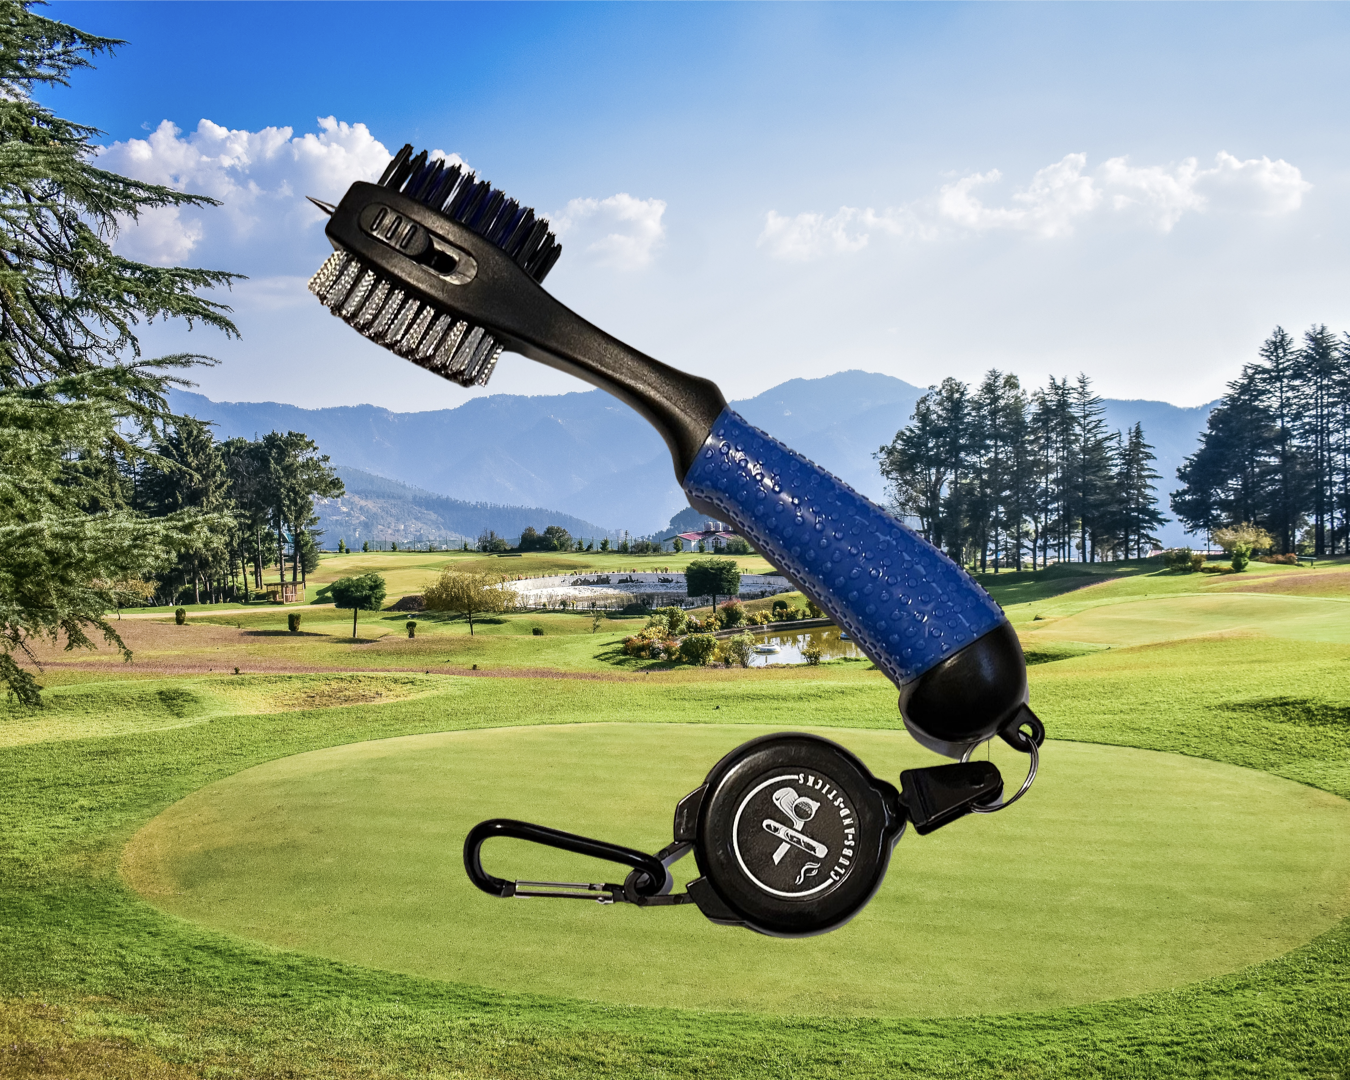 Clubs and Sticks Golf Brush - Wholesale